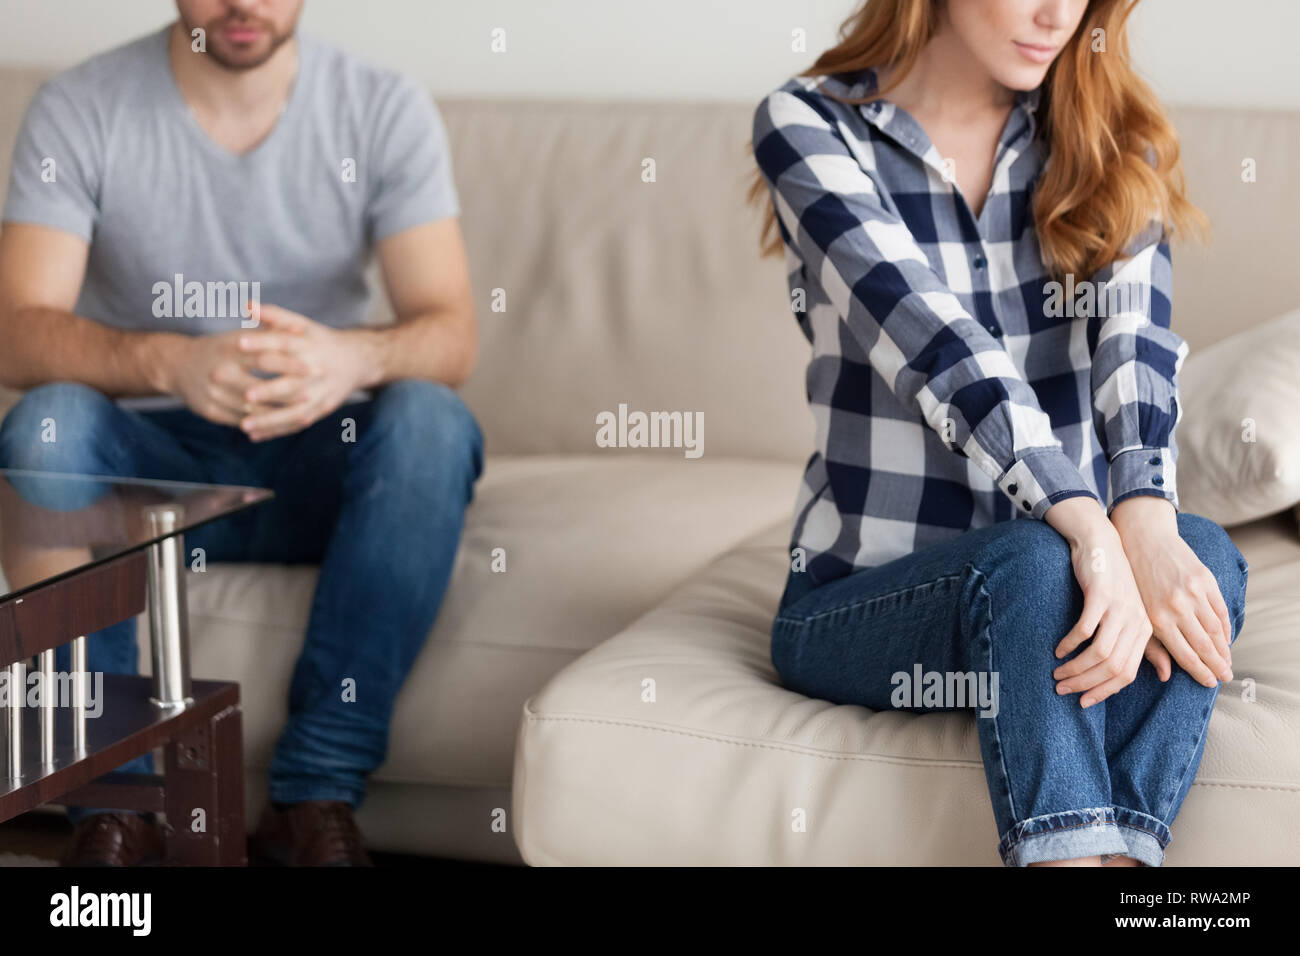 Closeup view of unhappy couple sitting on couch not talking Stock Photo